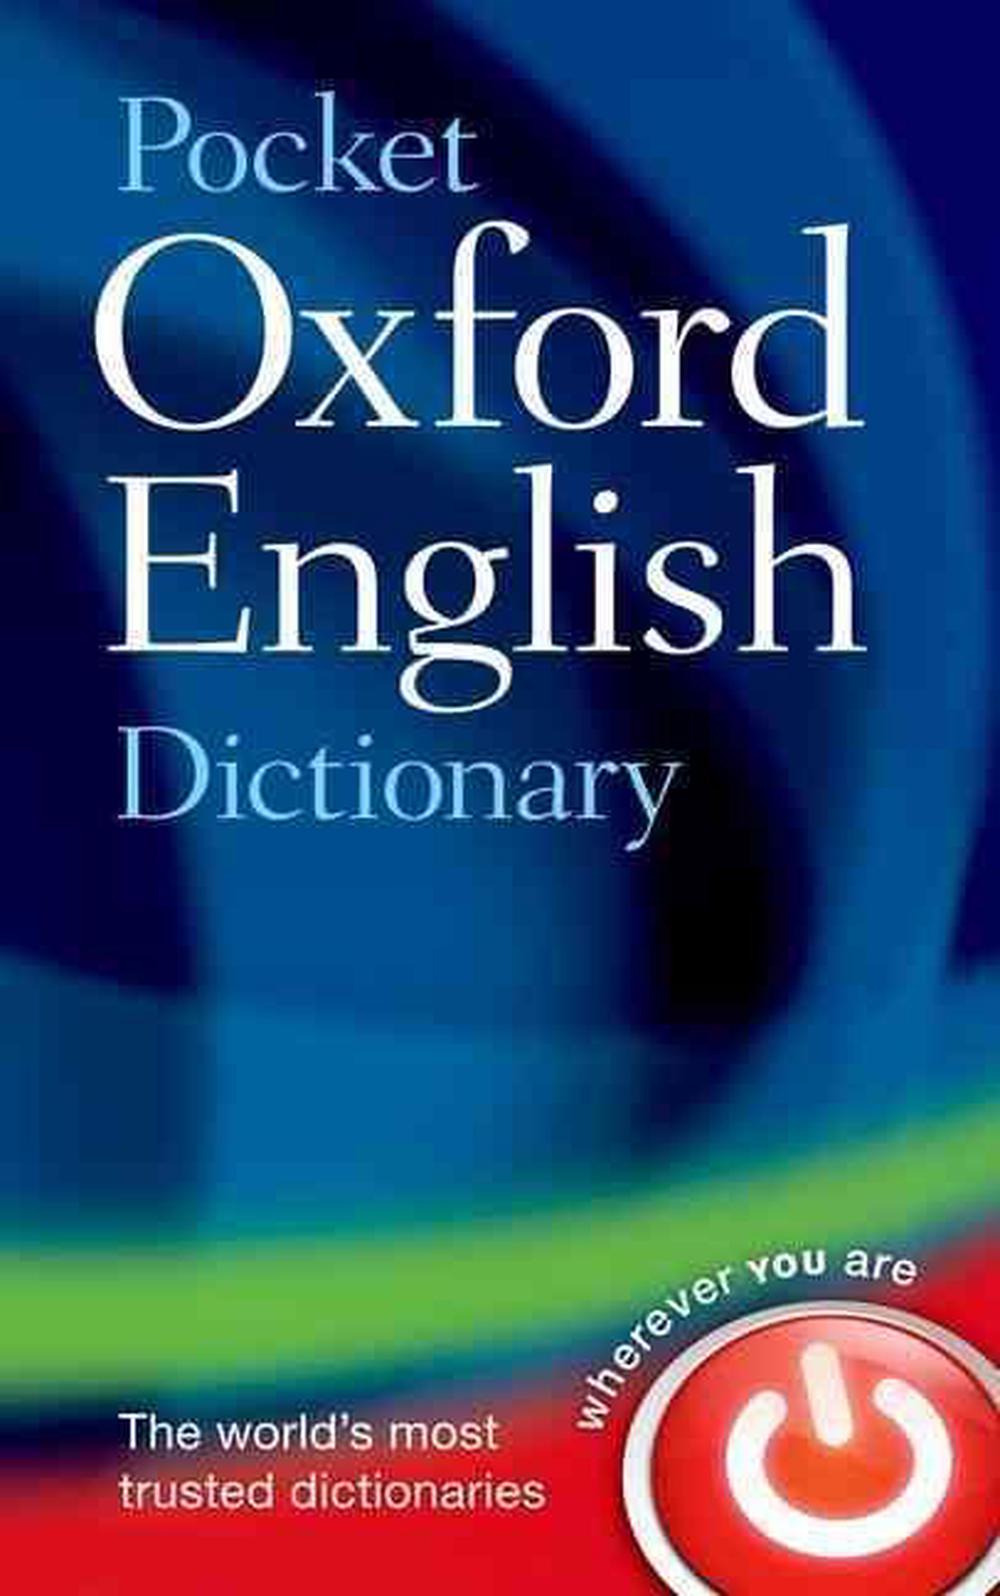 assignments dictionary oxford